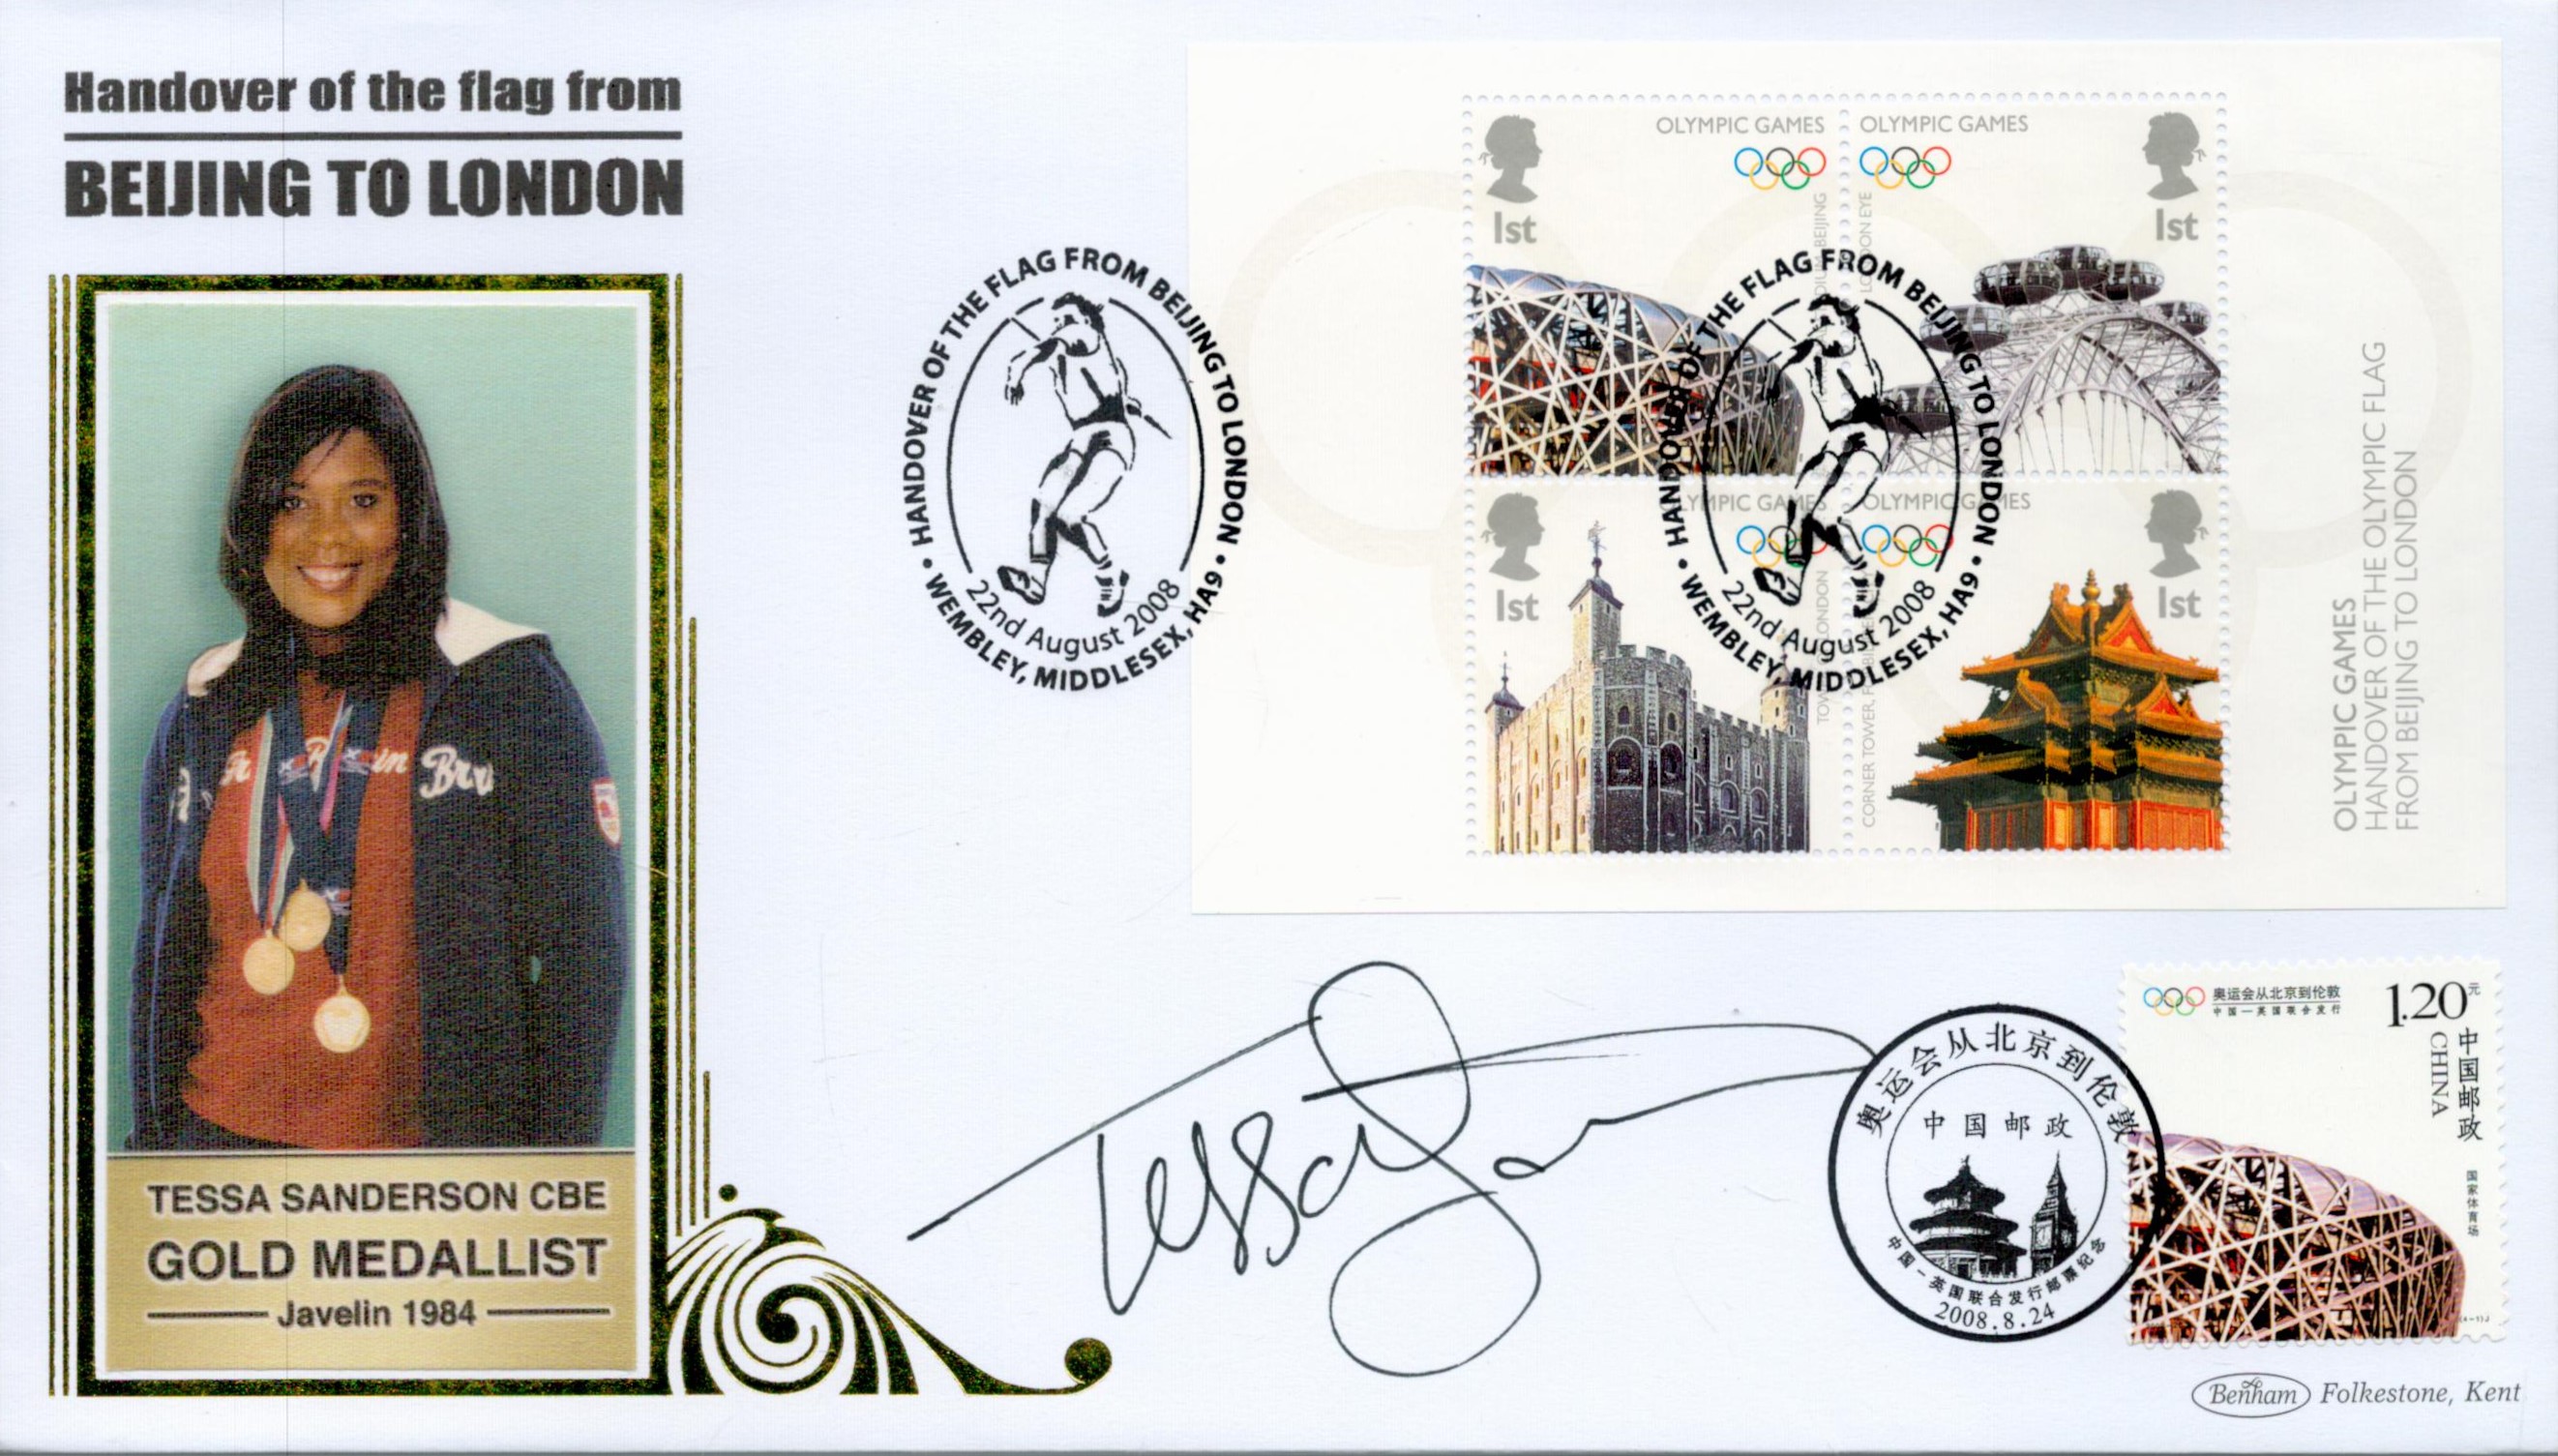 Olympics Tessa Sanderson signed Beijing to London commemorative FDC PM Handover of the flag from